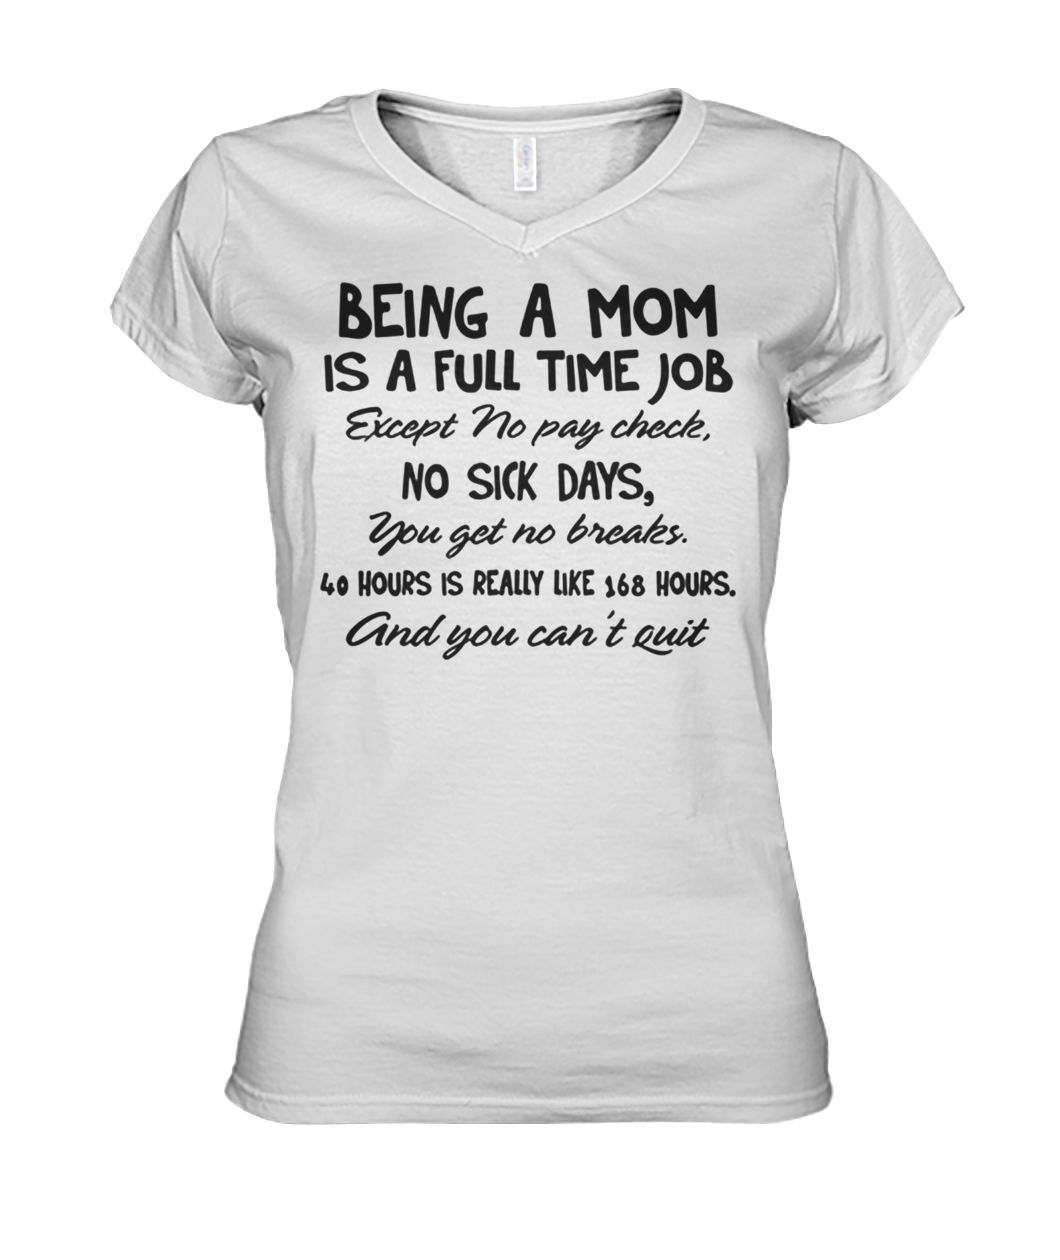 Being a mom is a full time job except no pay check no sick days women's v-neck